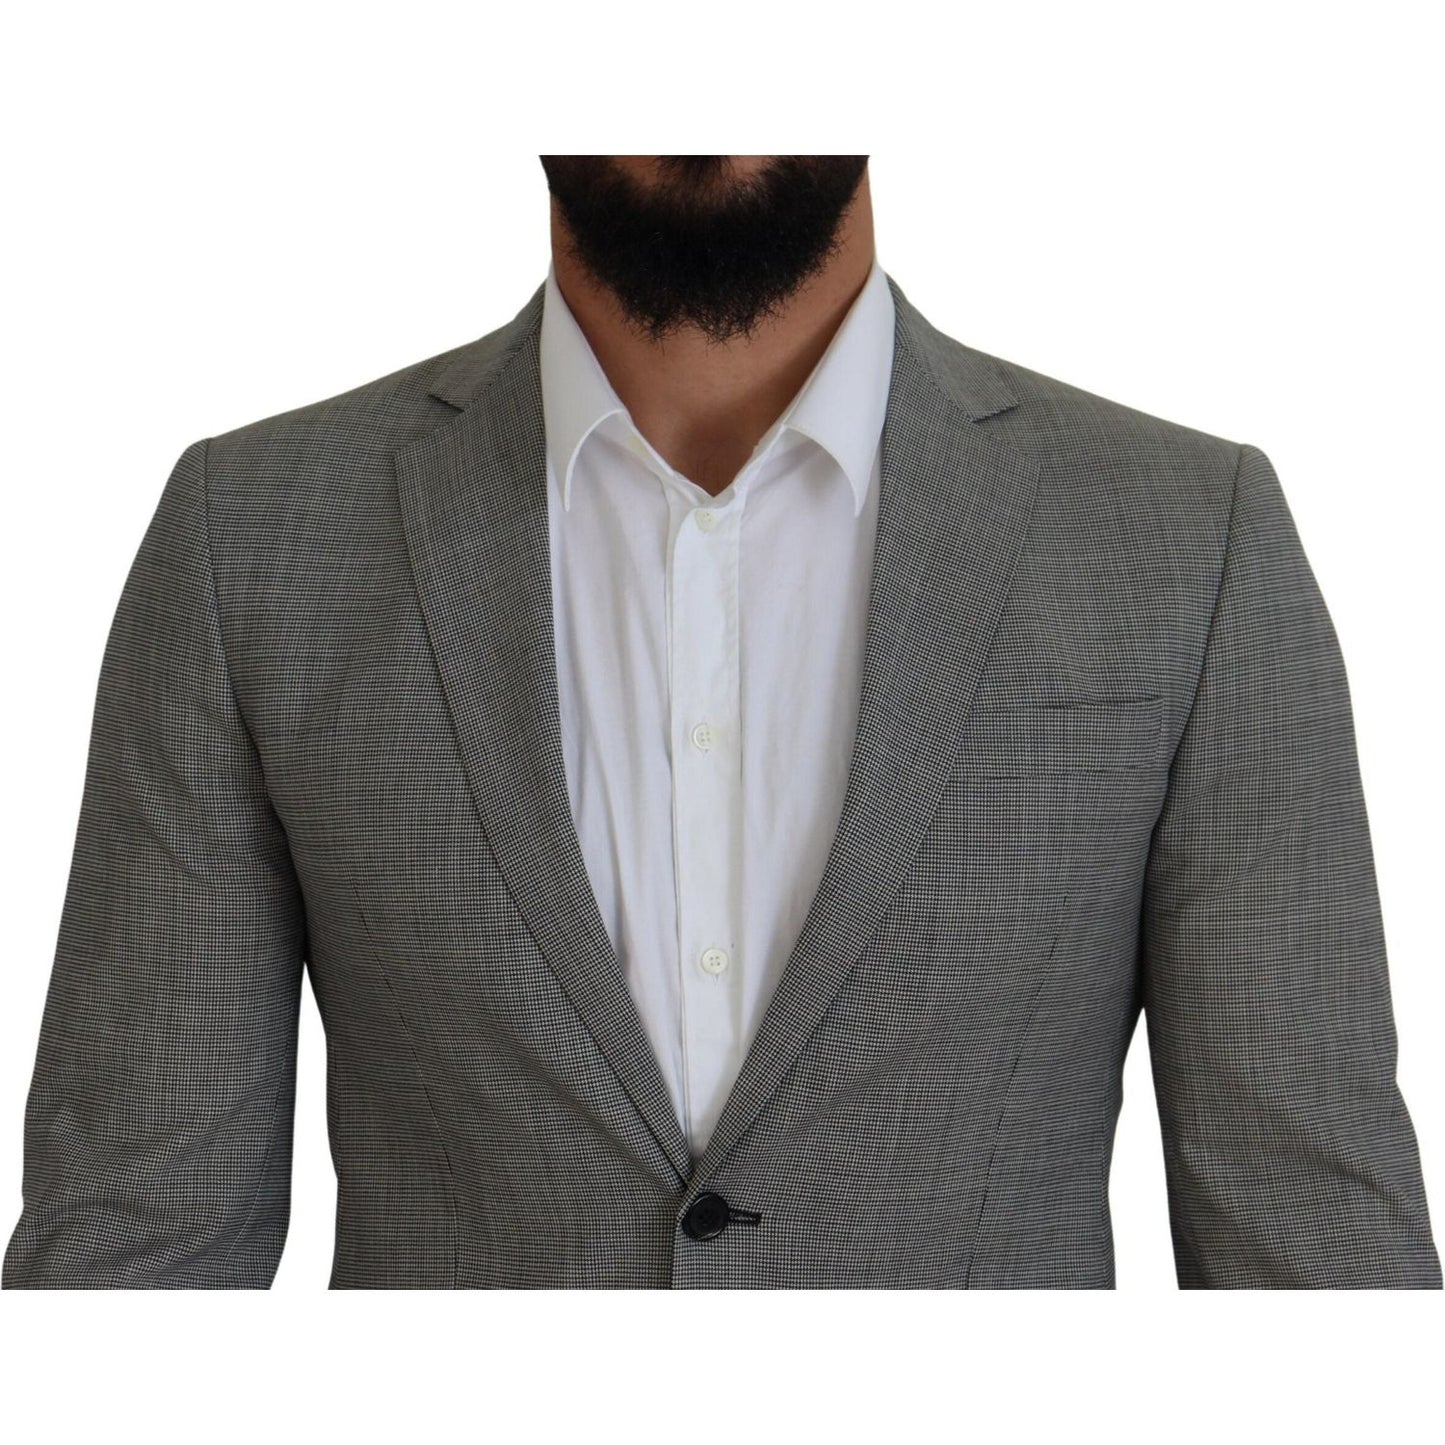 Dsquared² Gray Wool Single Breasted 2 Piece PARIS Suit gray-wool-single-breasted-2-piece-paris-suit